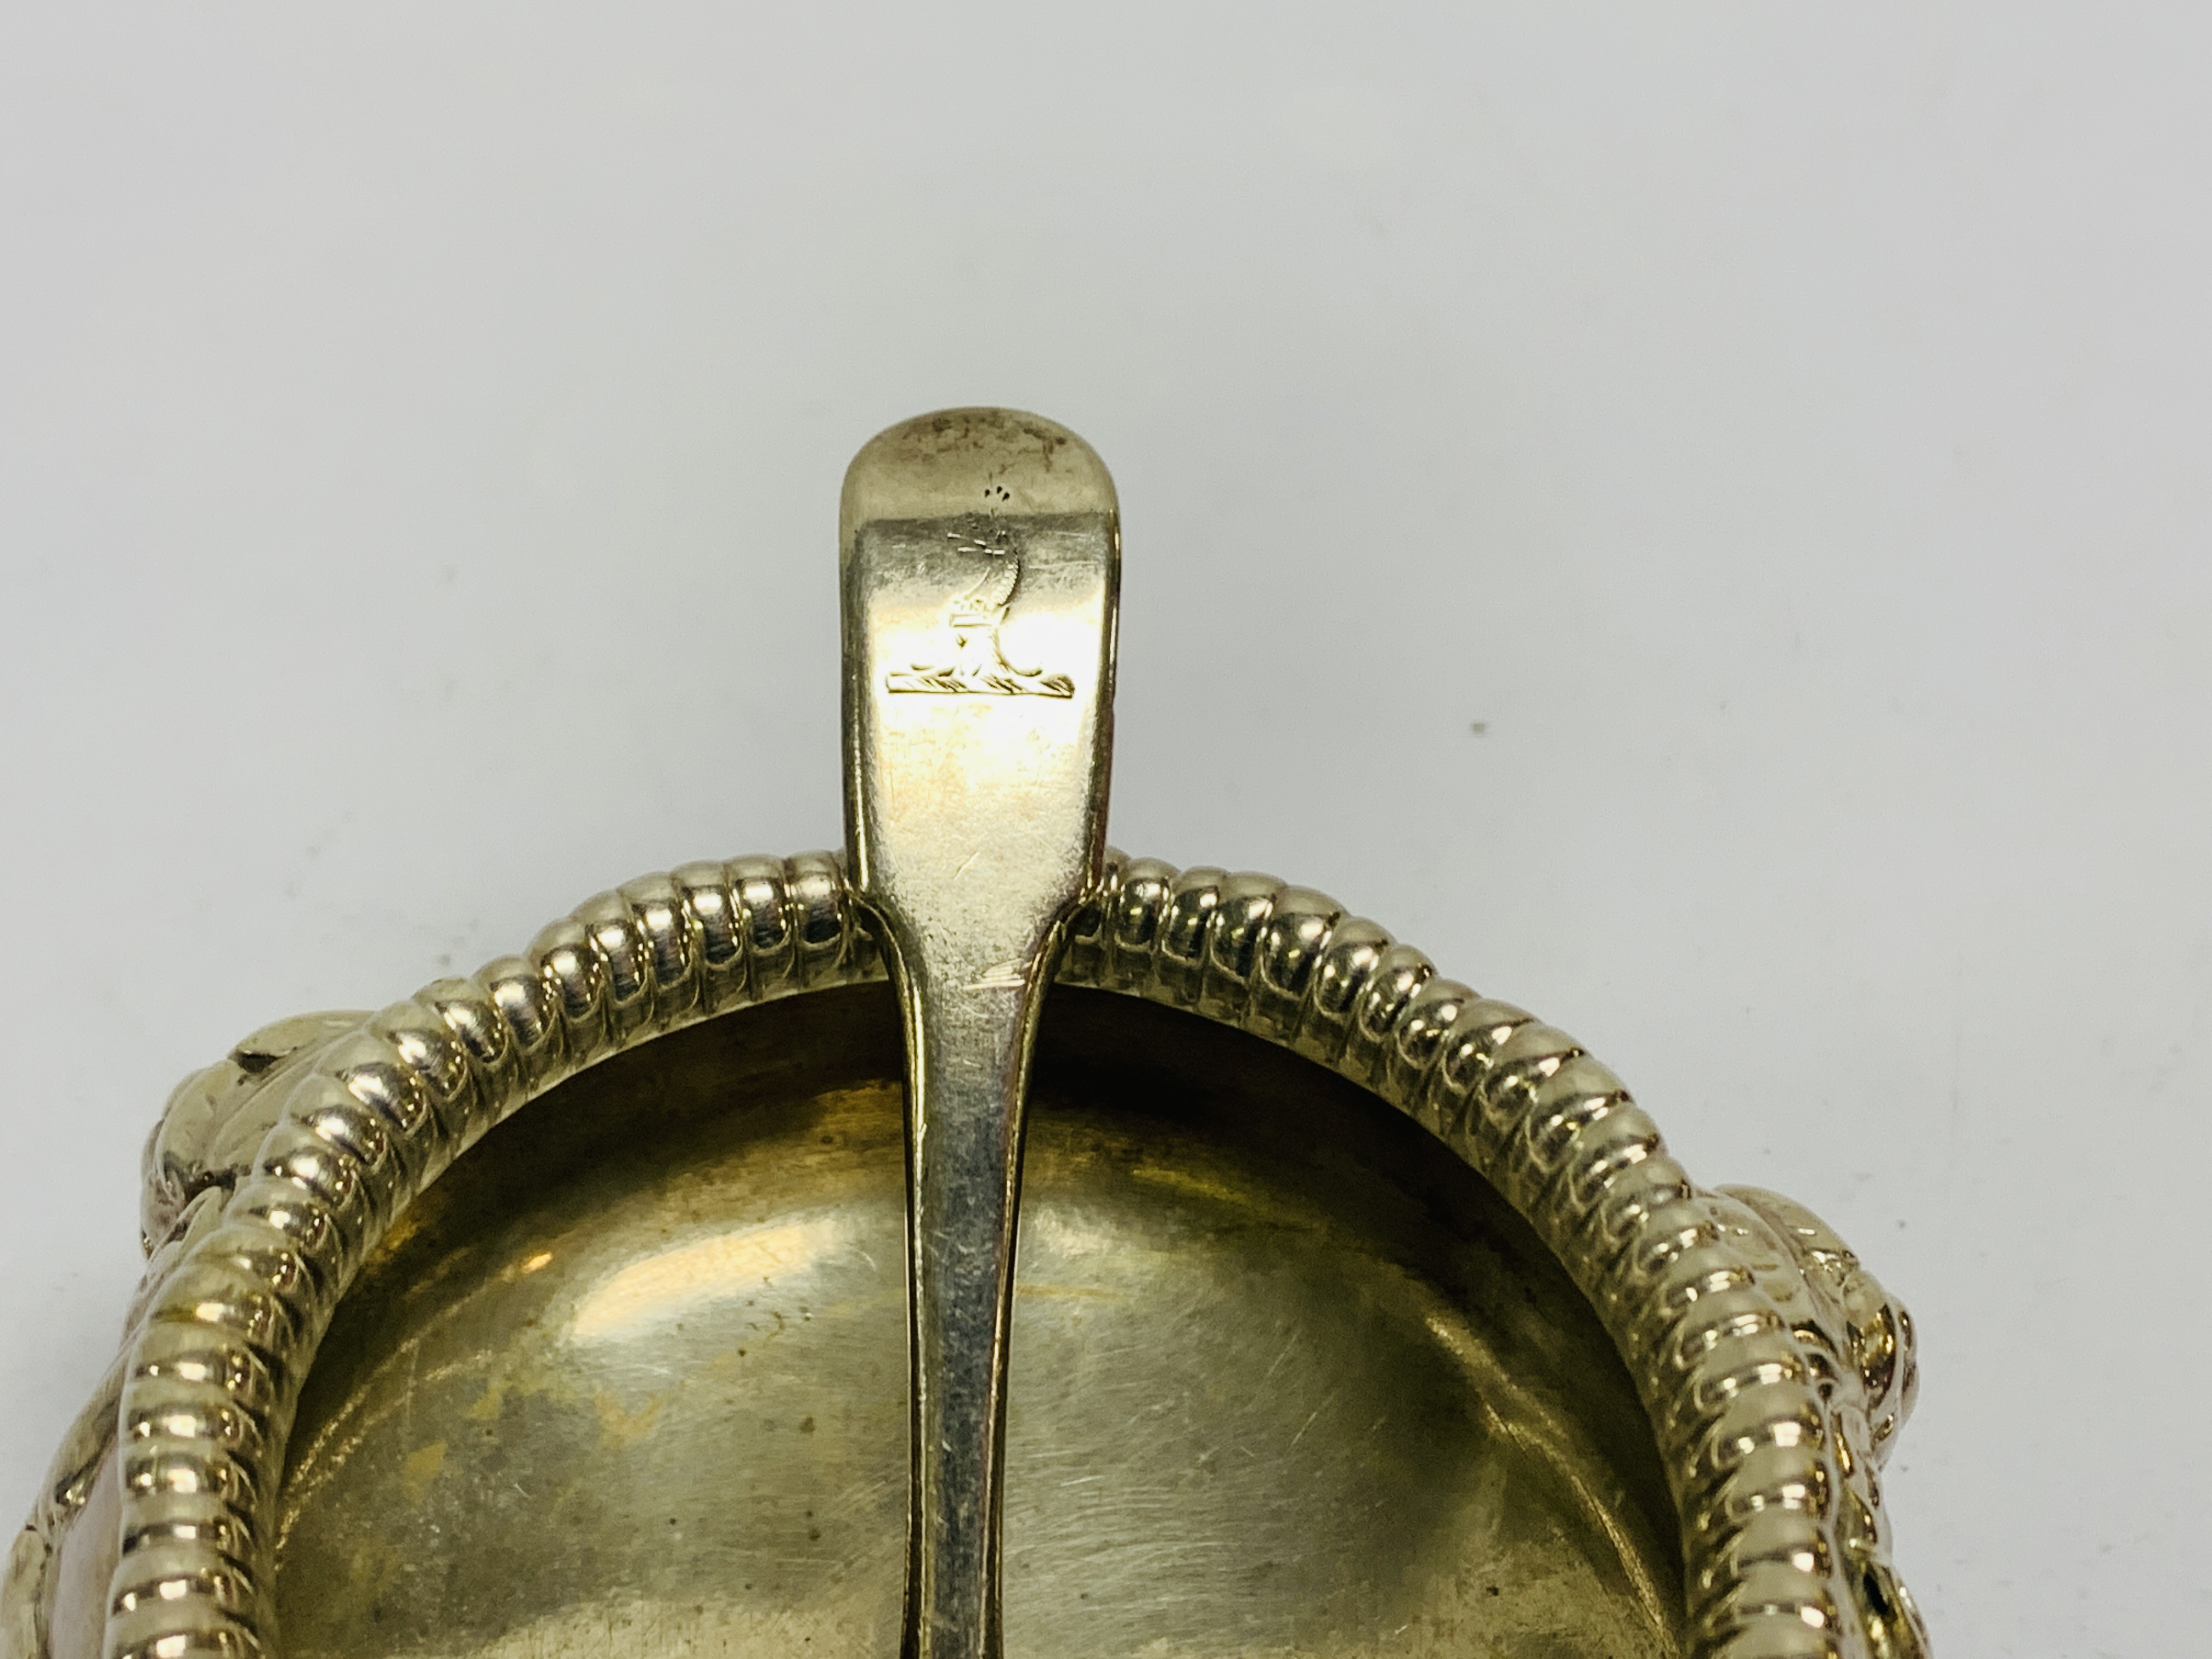 A GEORGE III IRISH TRIPOD SILVER SALT, HAVING LIONS' HEADS ABOVE LIONS' FEET SUPPORTS, - Image 5 of 10